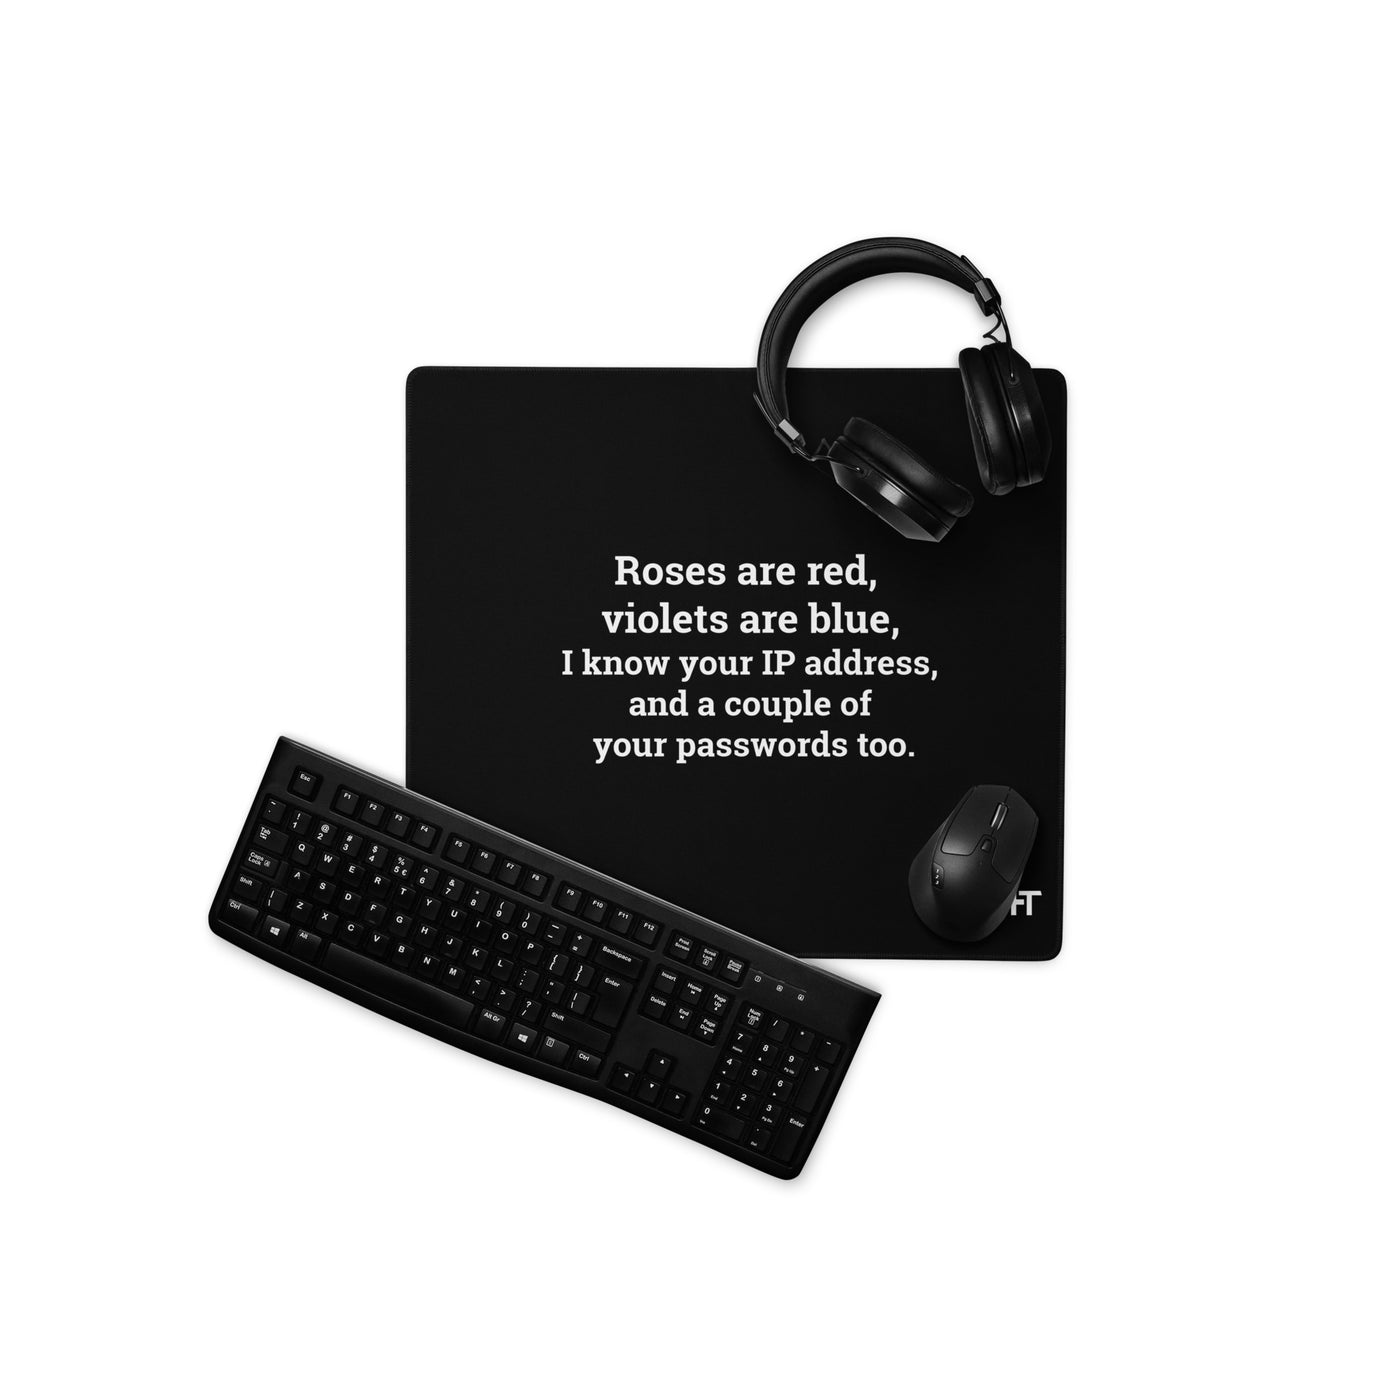 Roses are red; I know your IP and Passwords - Desk Mat